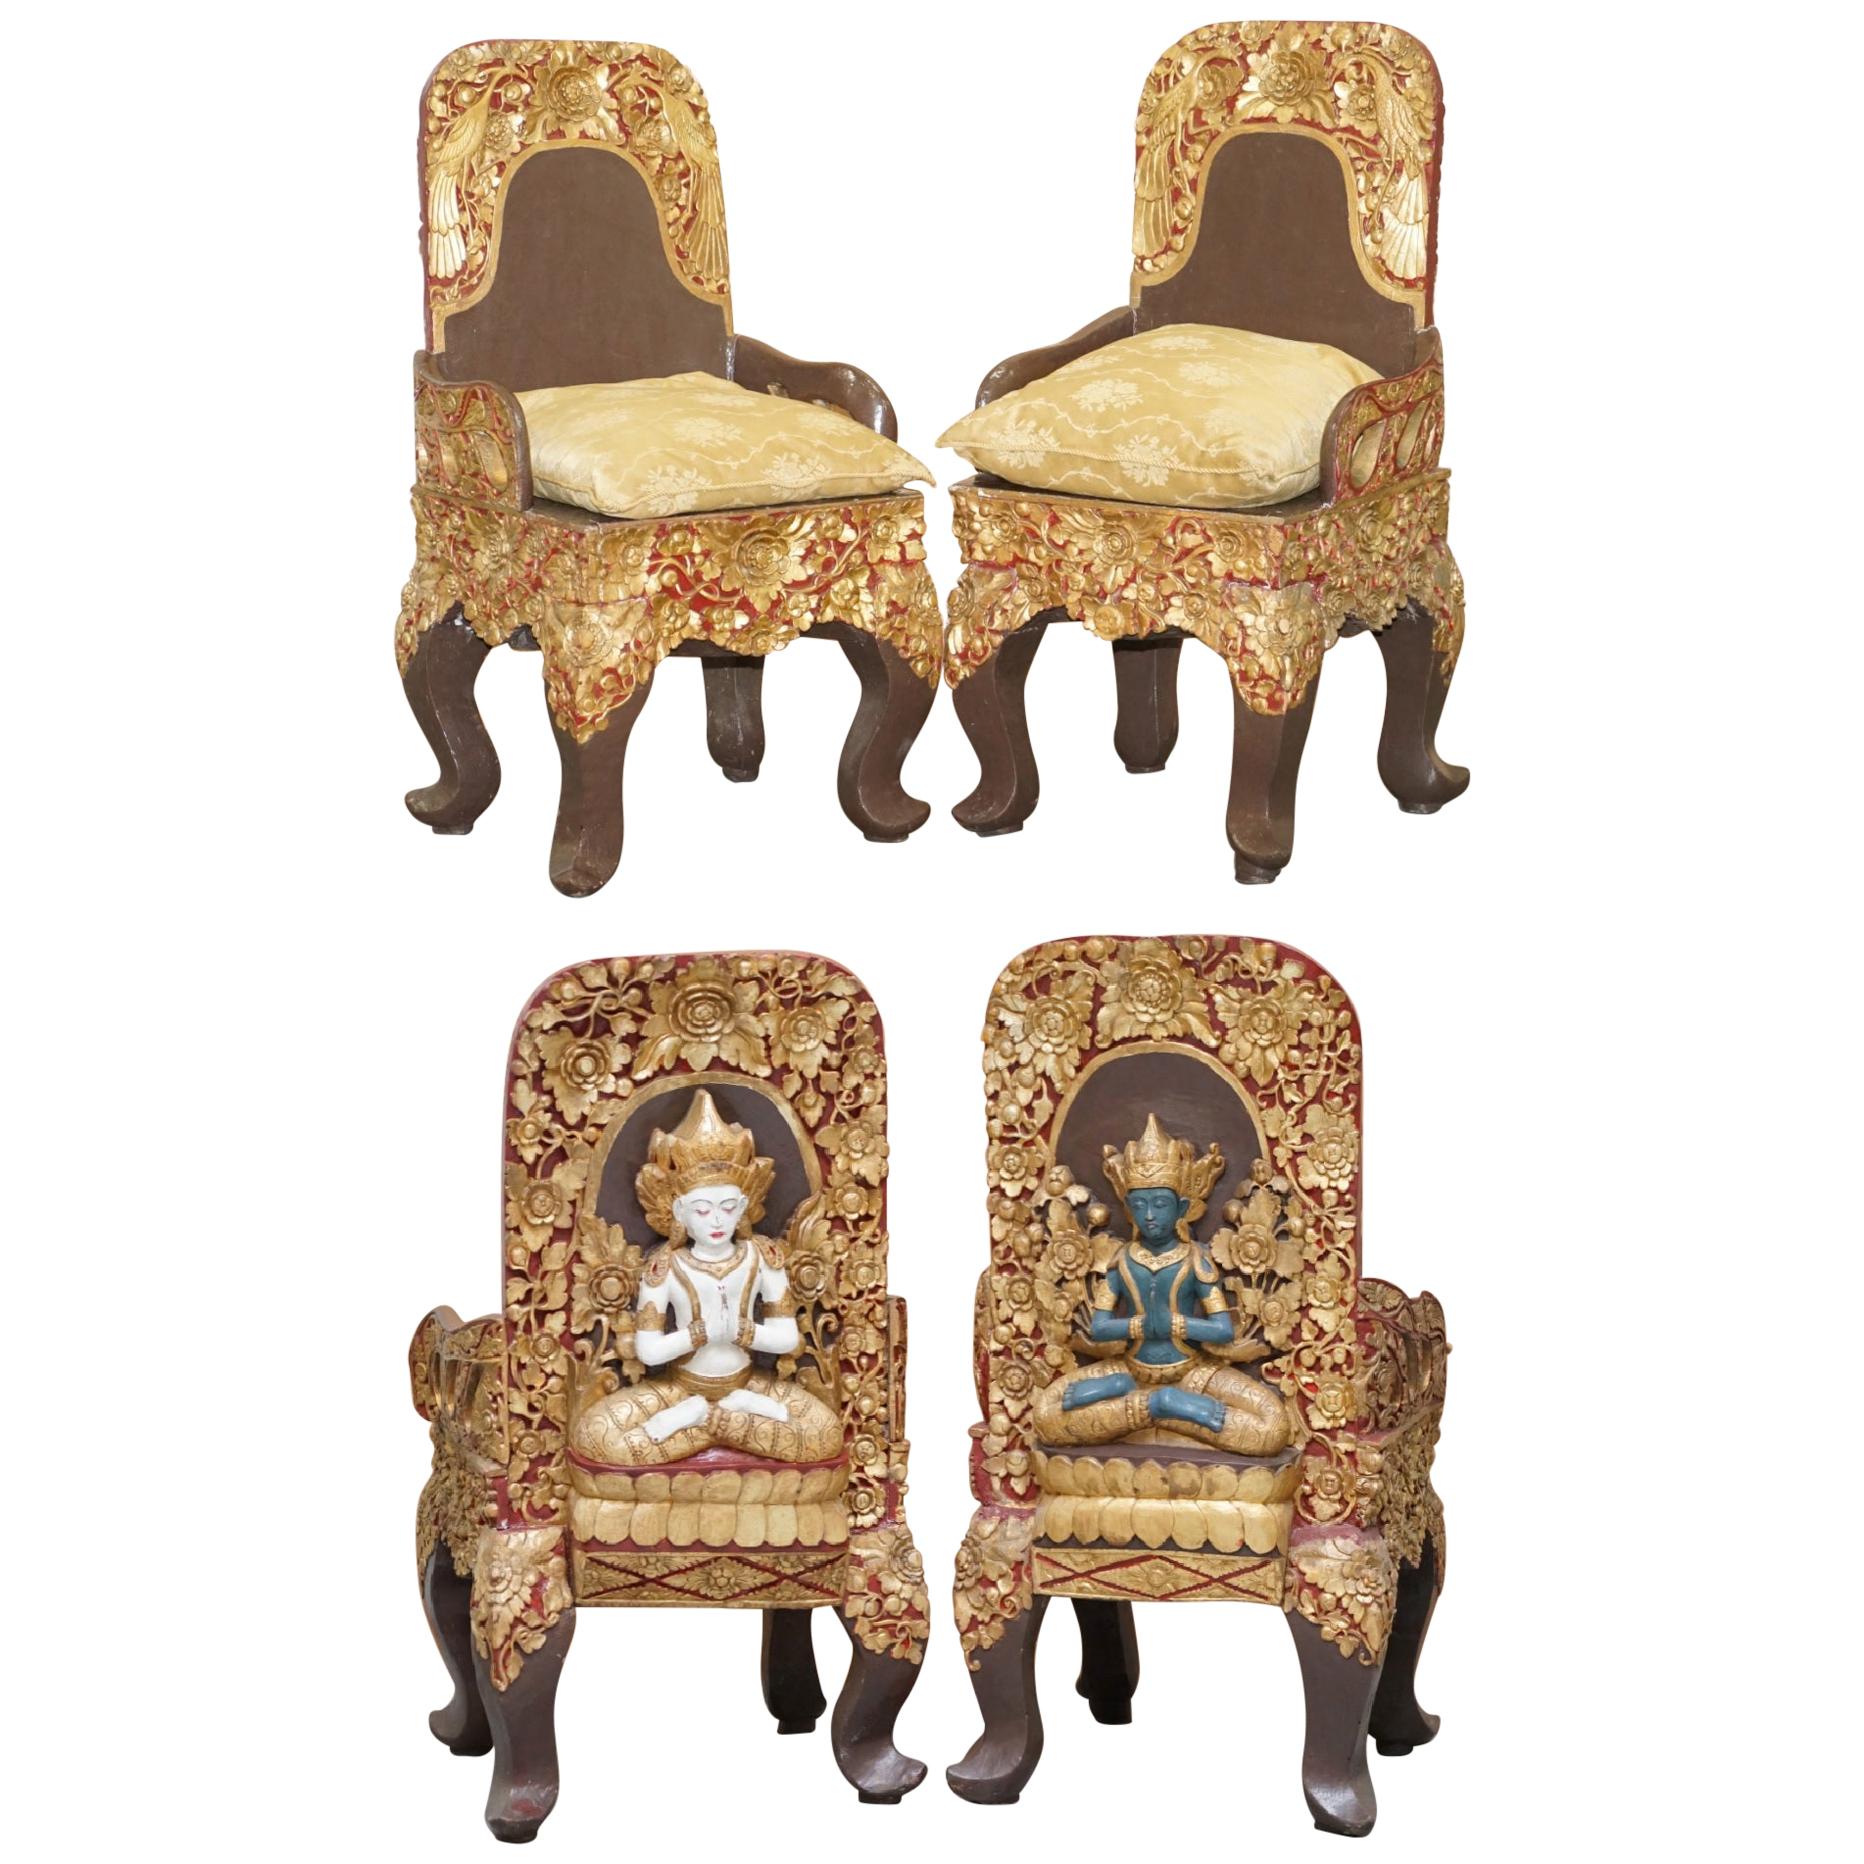 Rare Pair of circa 1900 Tibetan Ceremonial Chairs Nyingma Buddha Carved in Backs For Sale